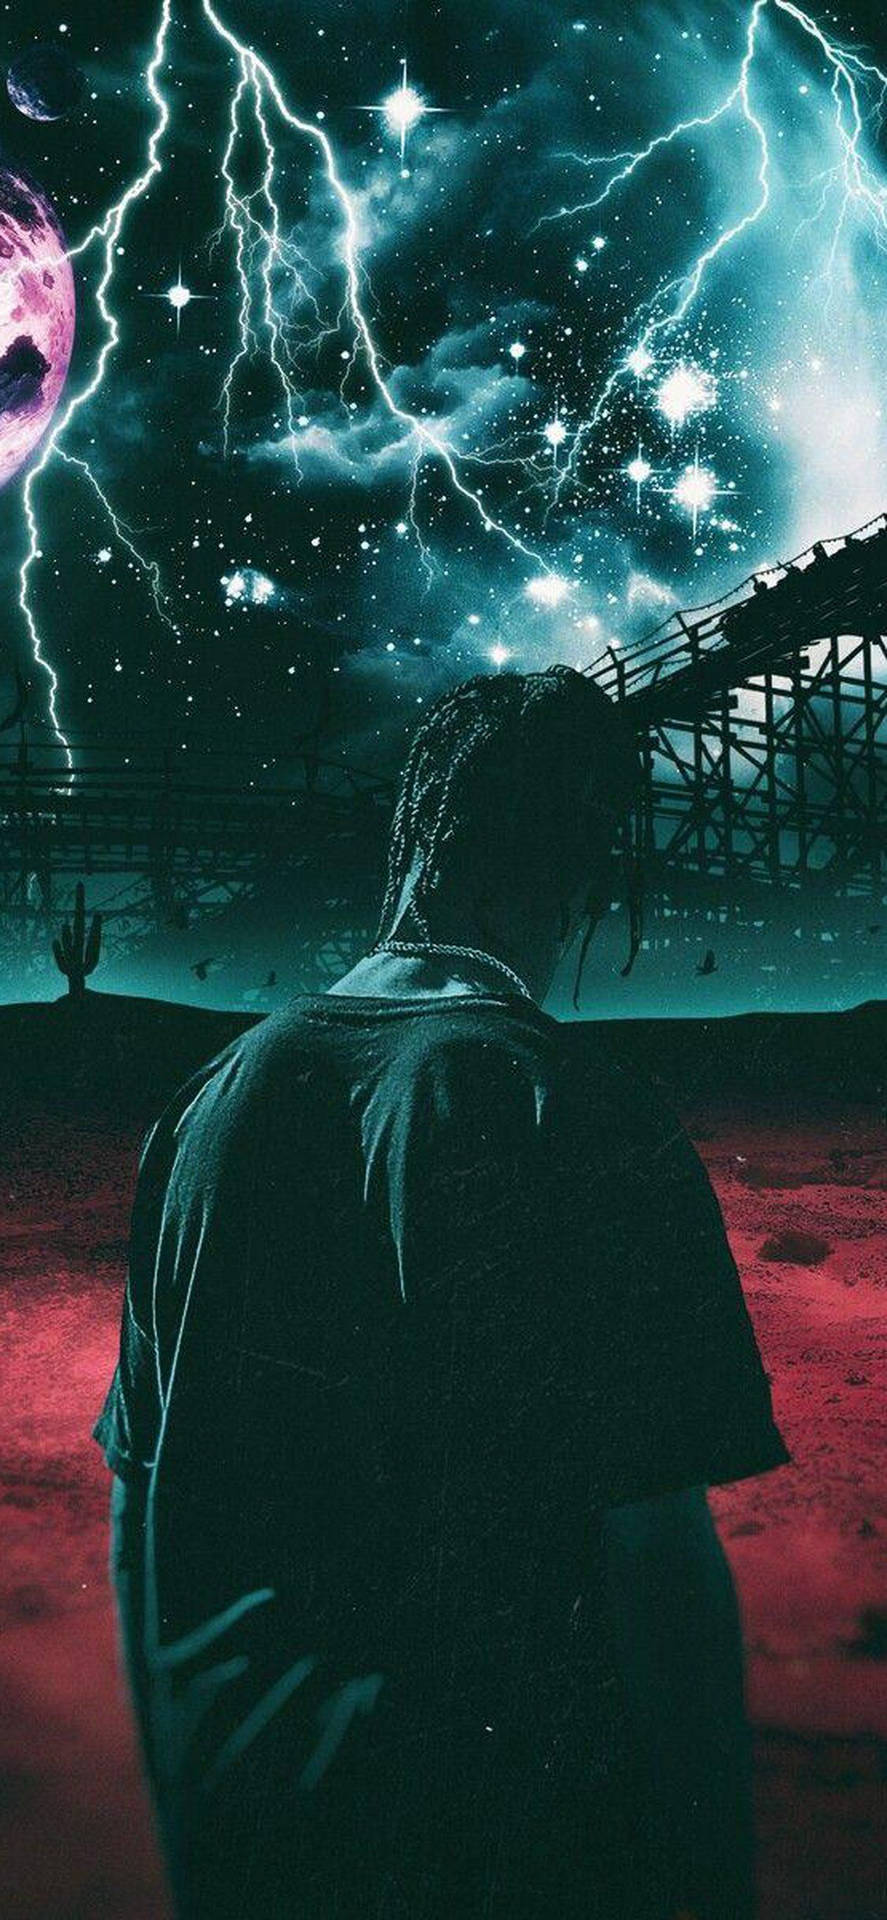 Top 999 Astroworld Wallpaper Full HD 4K Free To Use